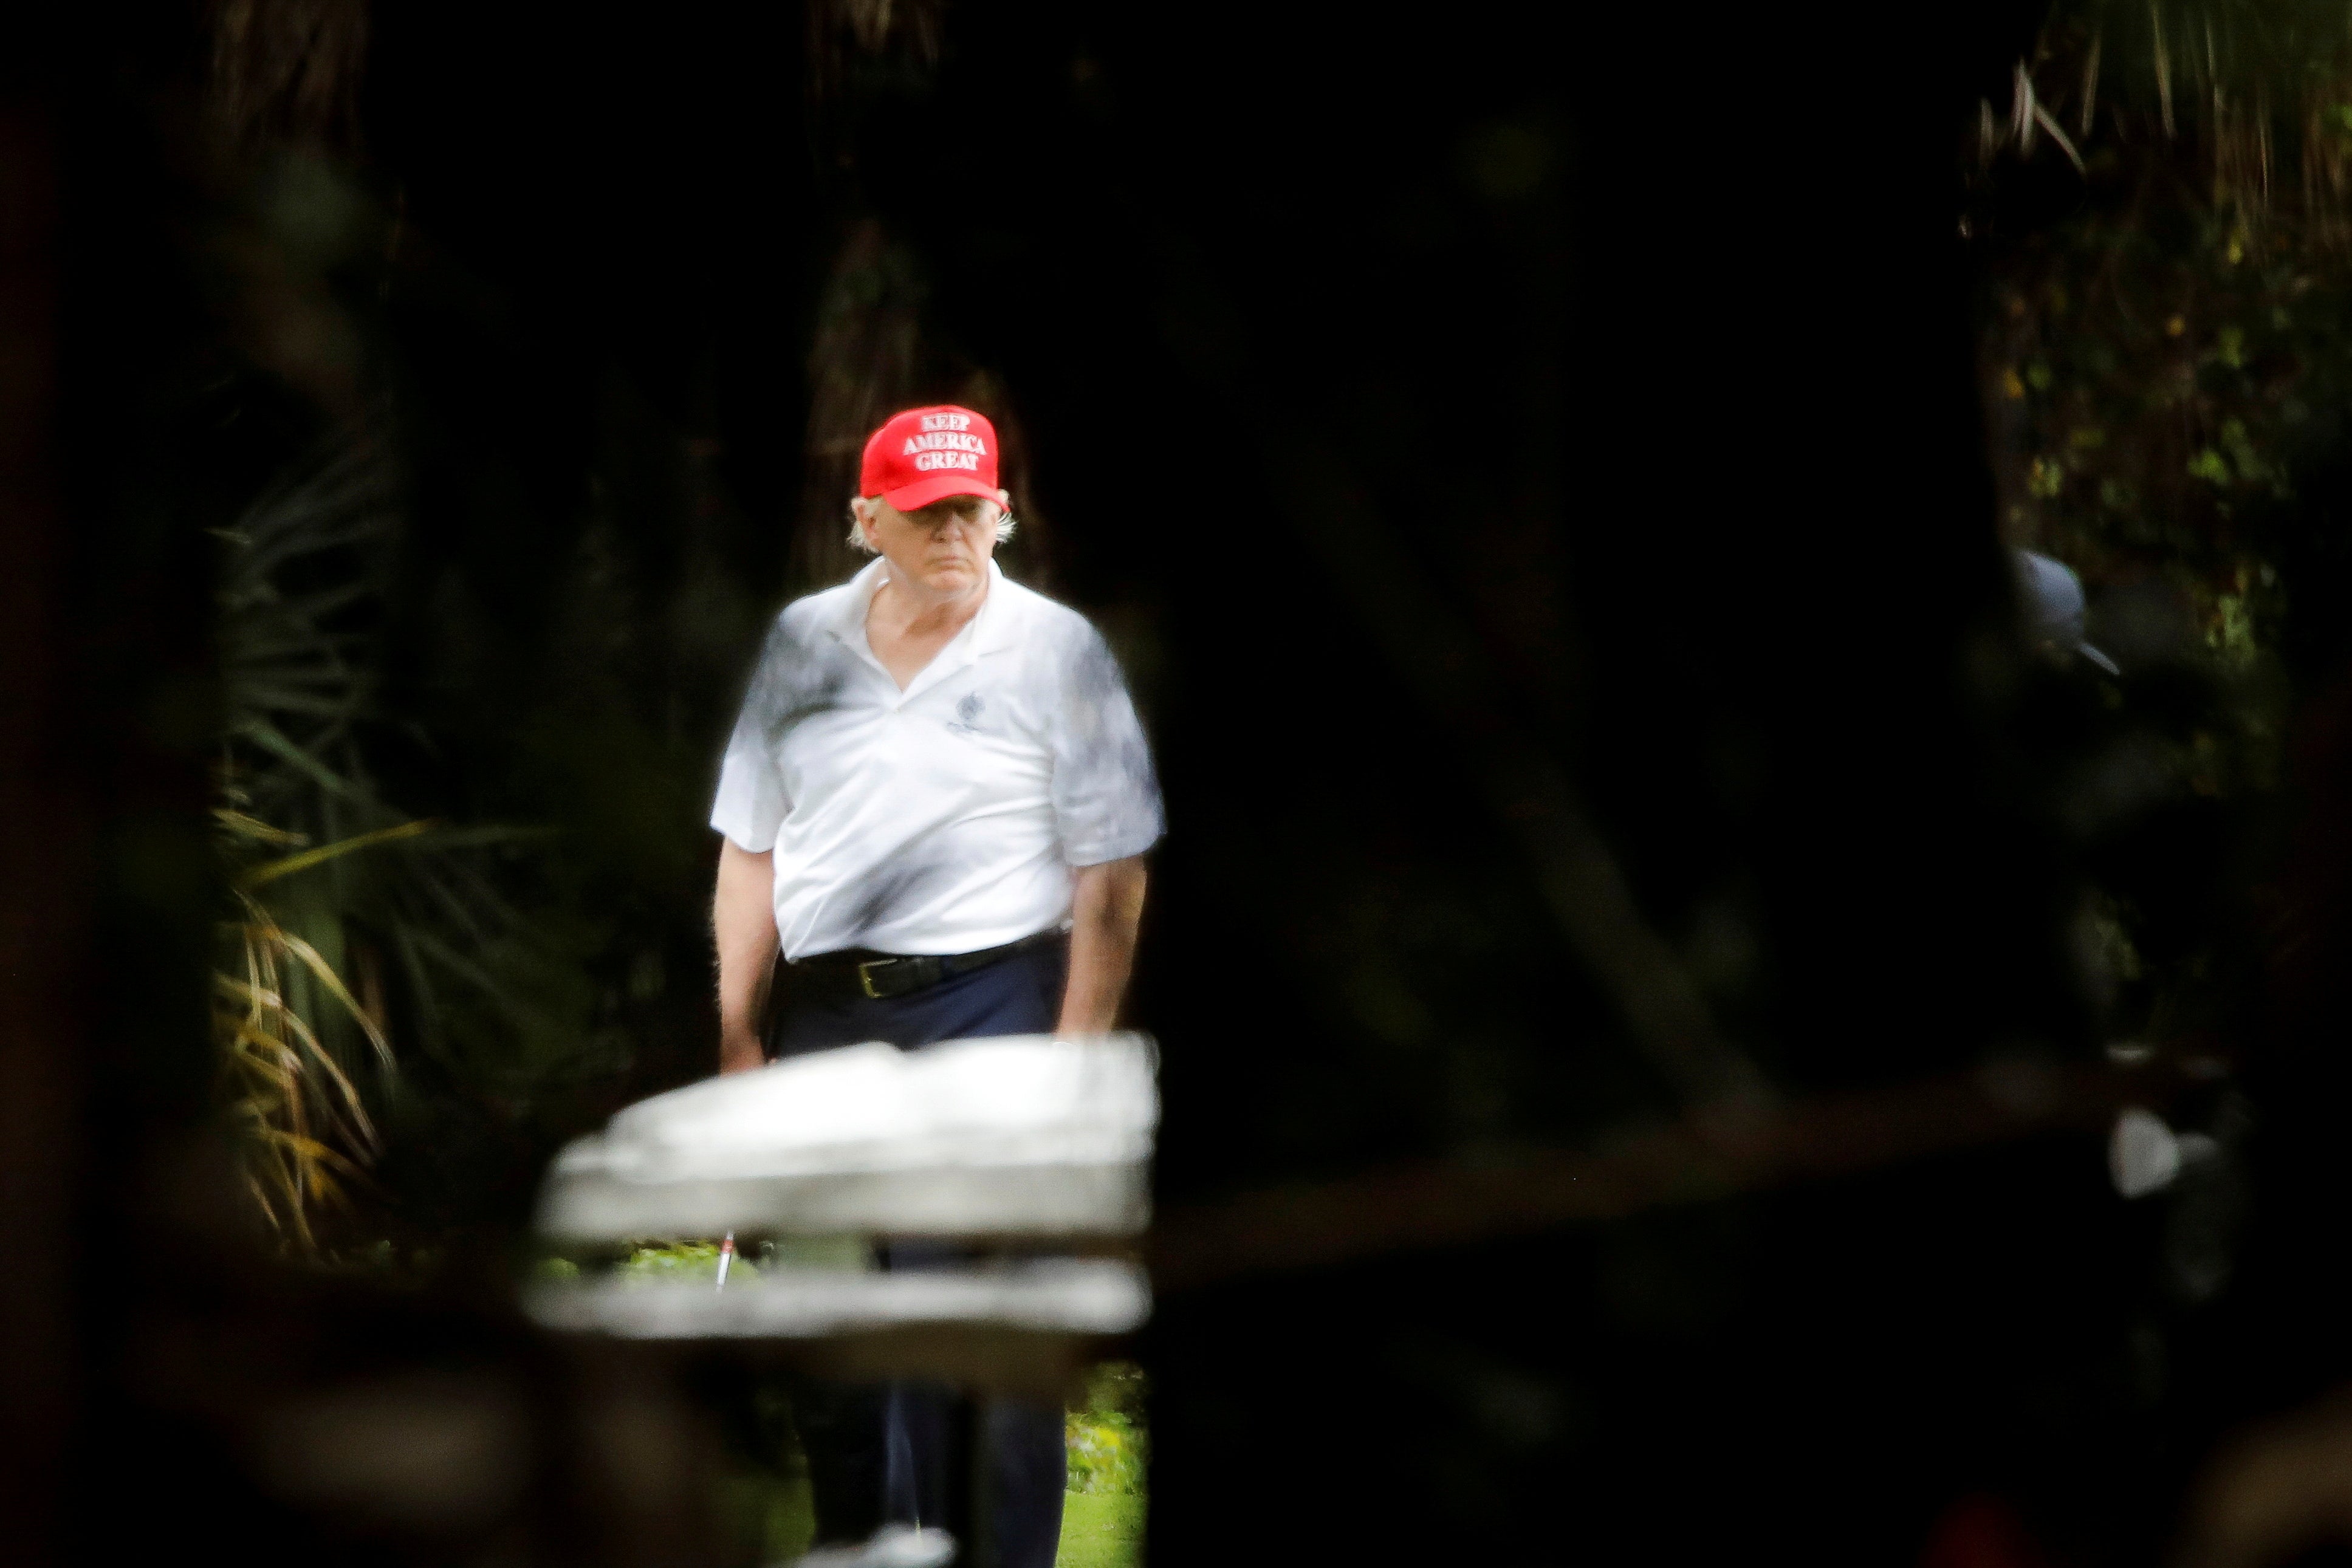 The US president playing golf at the Trump International Golf Club in West Palm Beach, Florida